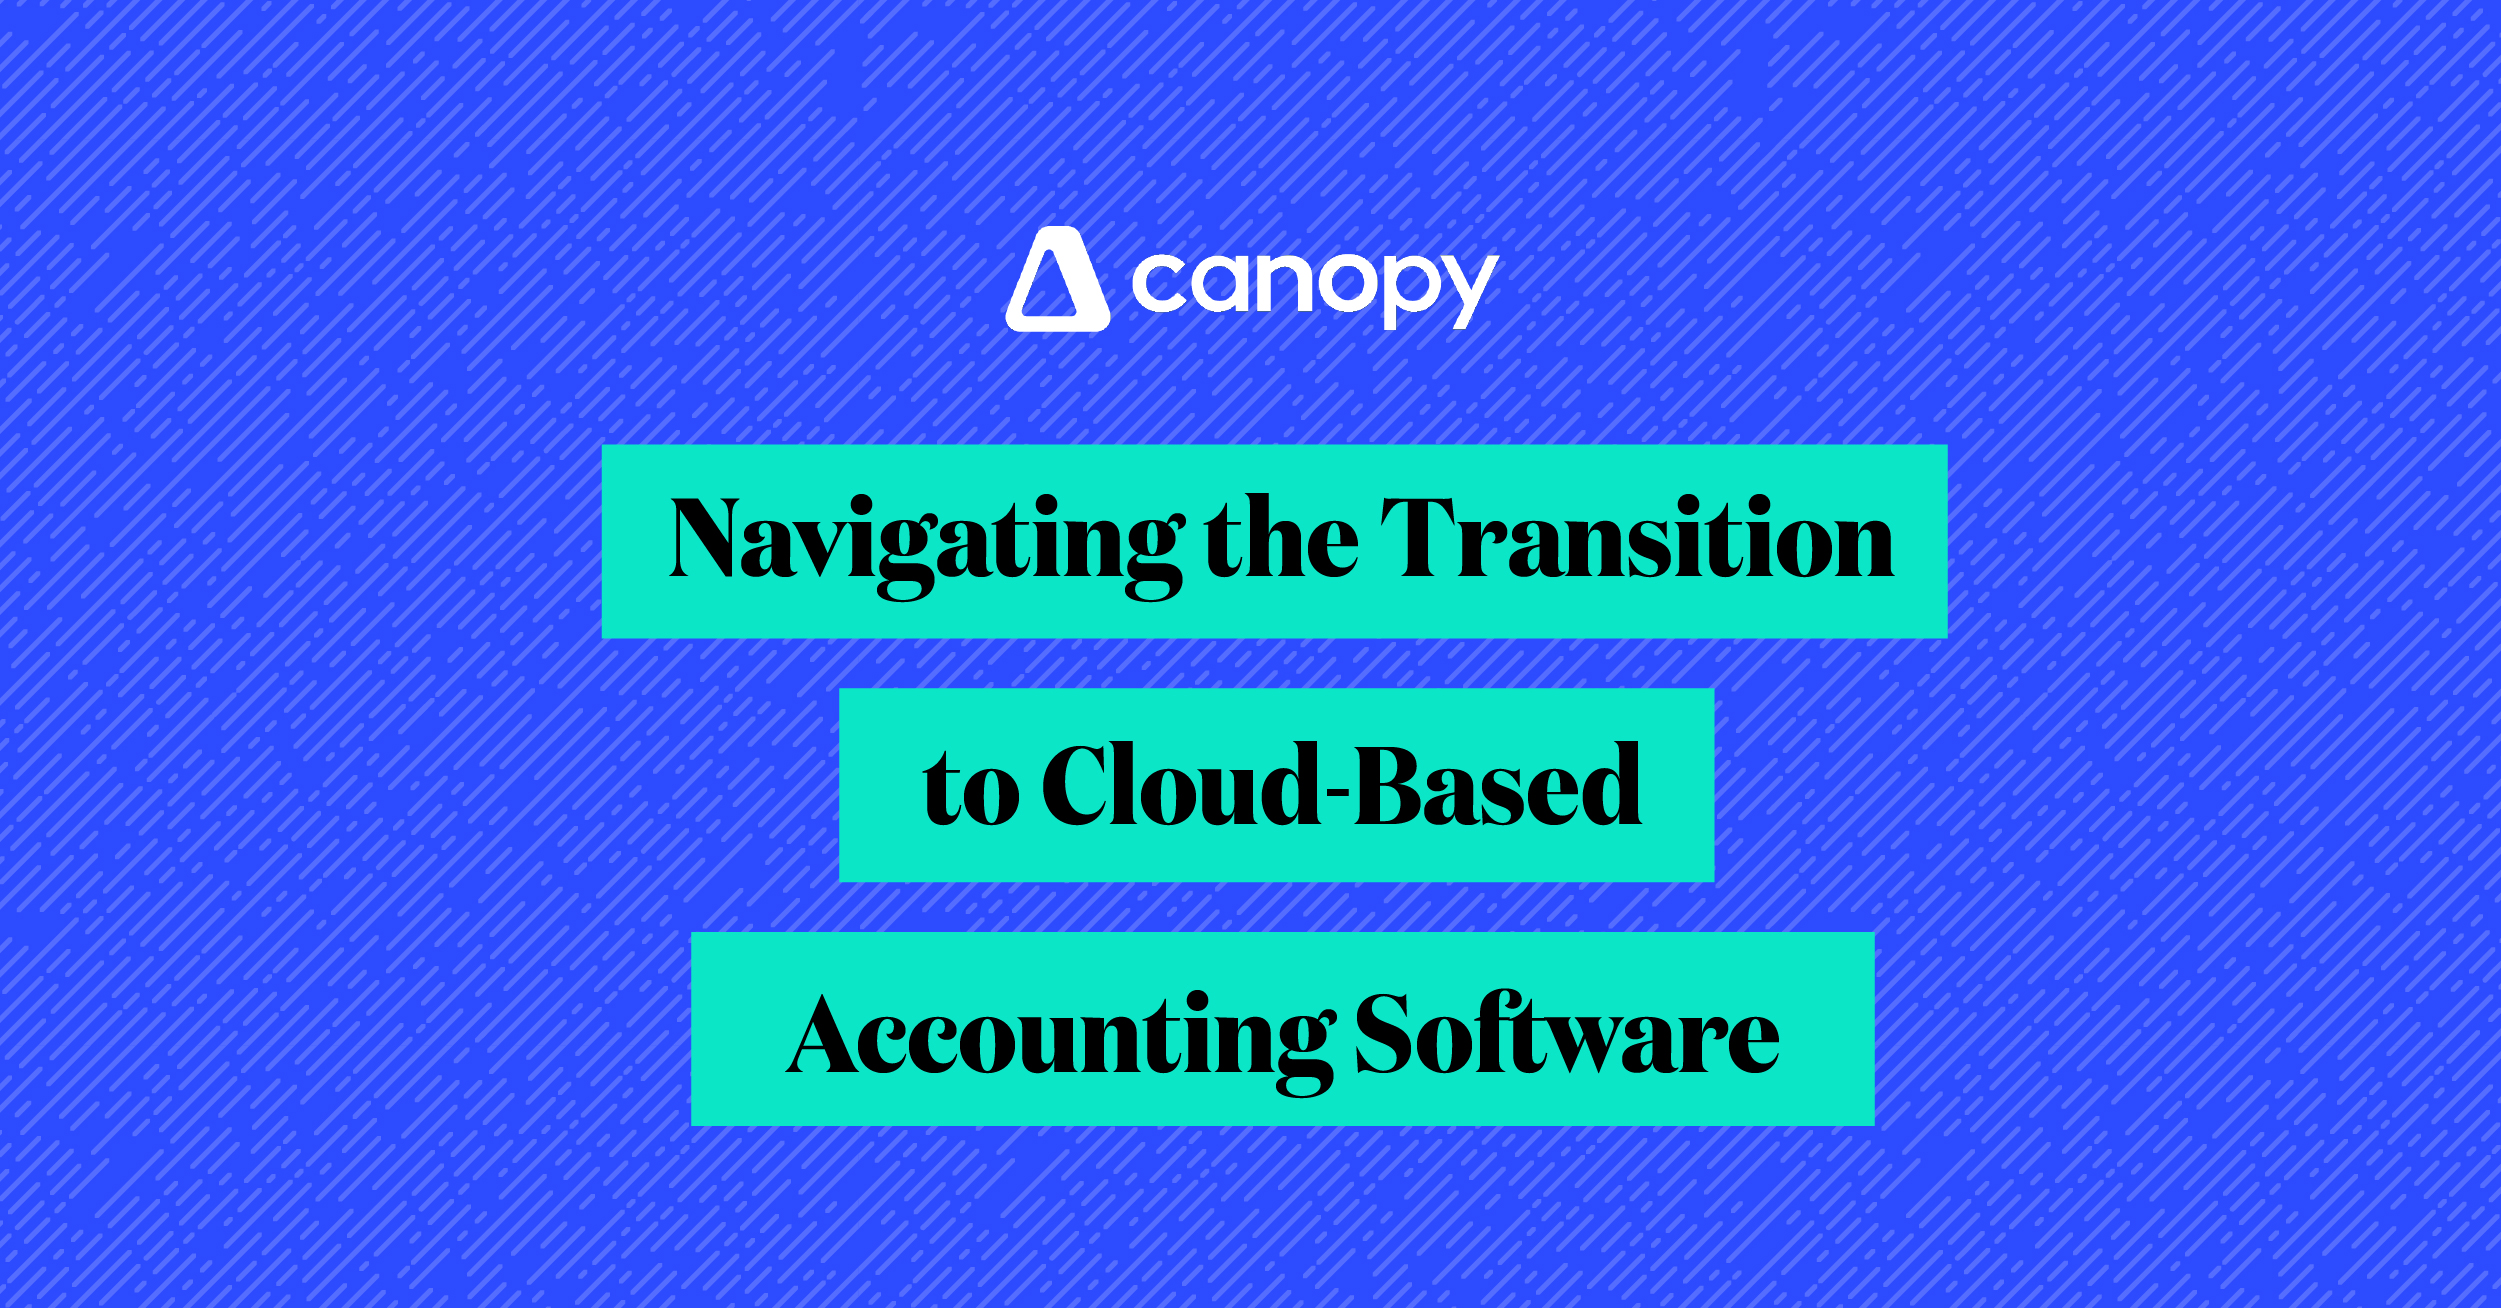 Making the Move to Cloud-Based Accounting Software